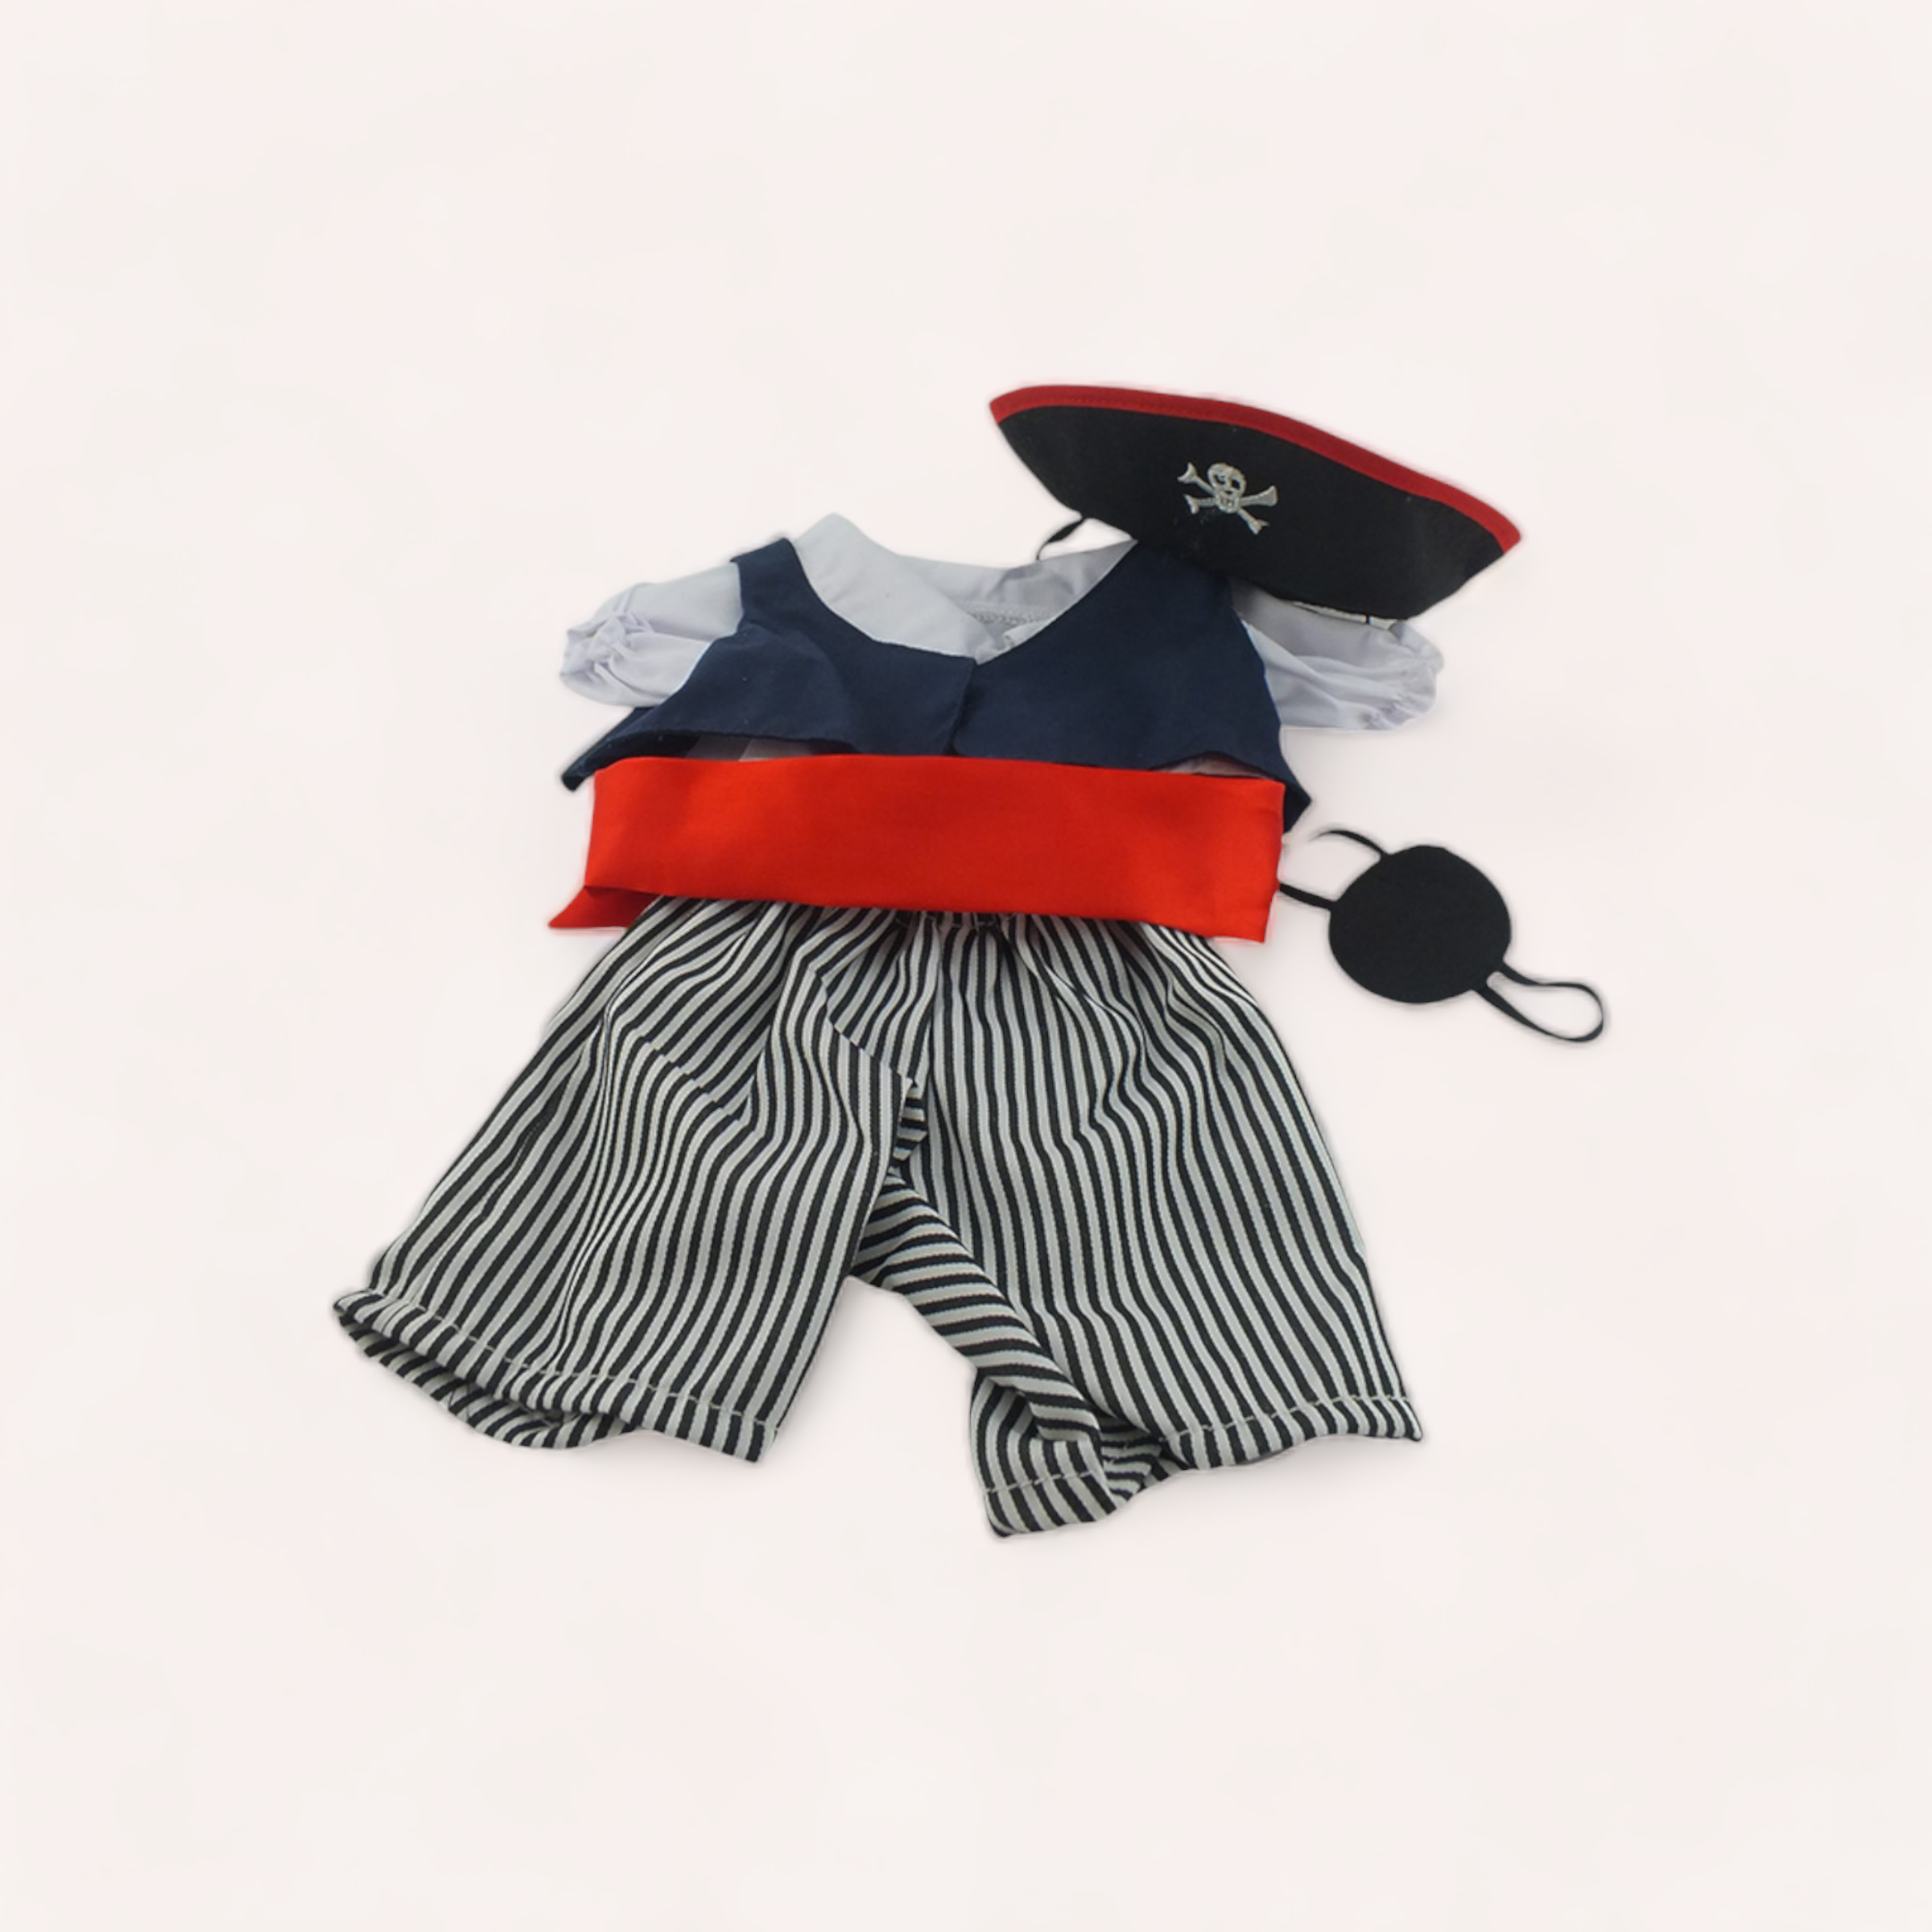 A Pirate Bear Outfit from The Teddy Factory with striped pants, a blue and red vest, white ruffled shirt, and a pirate hat with a skull and crossbones emblem, all laid out on a white.